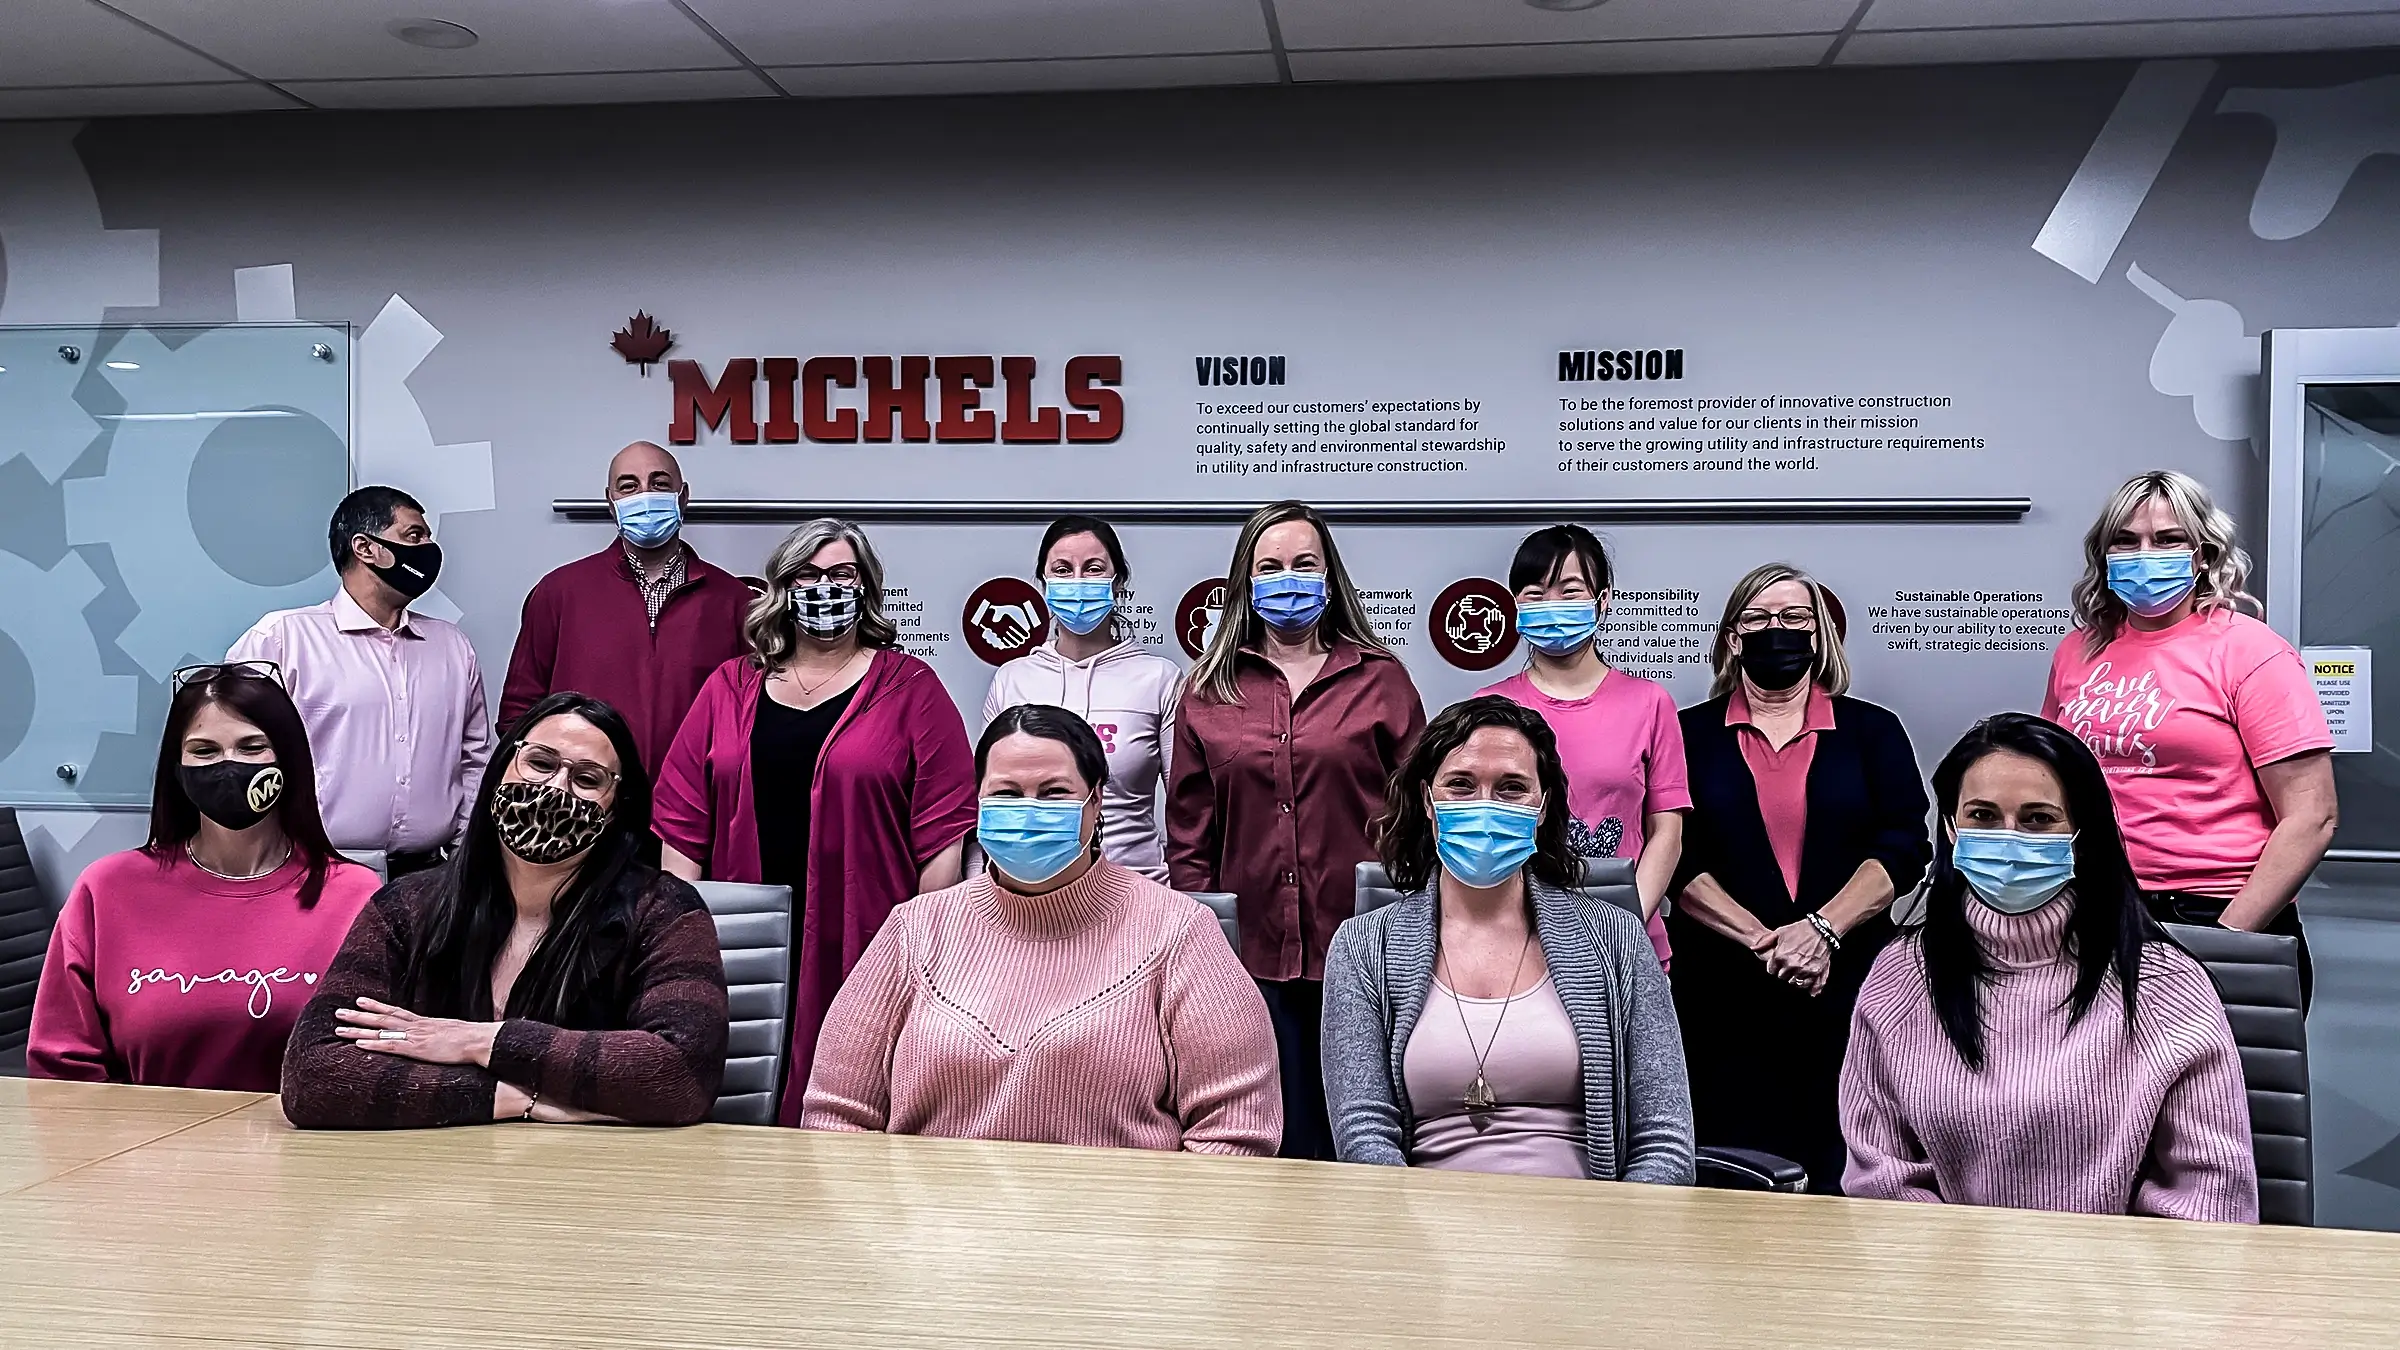 Team of Michels employees all wearing pink shirts in office